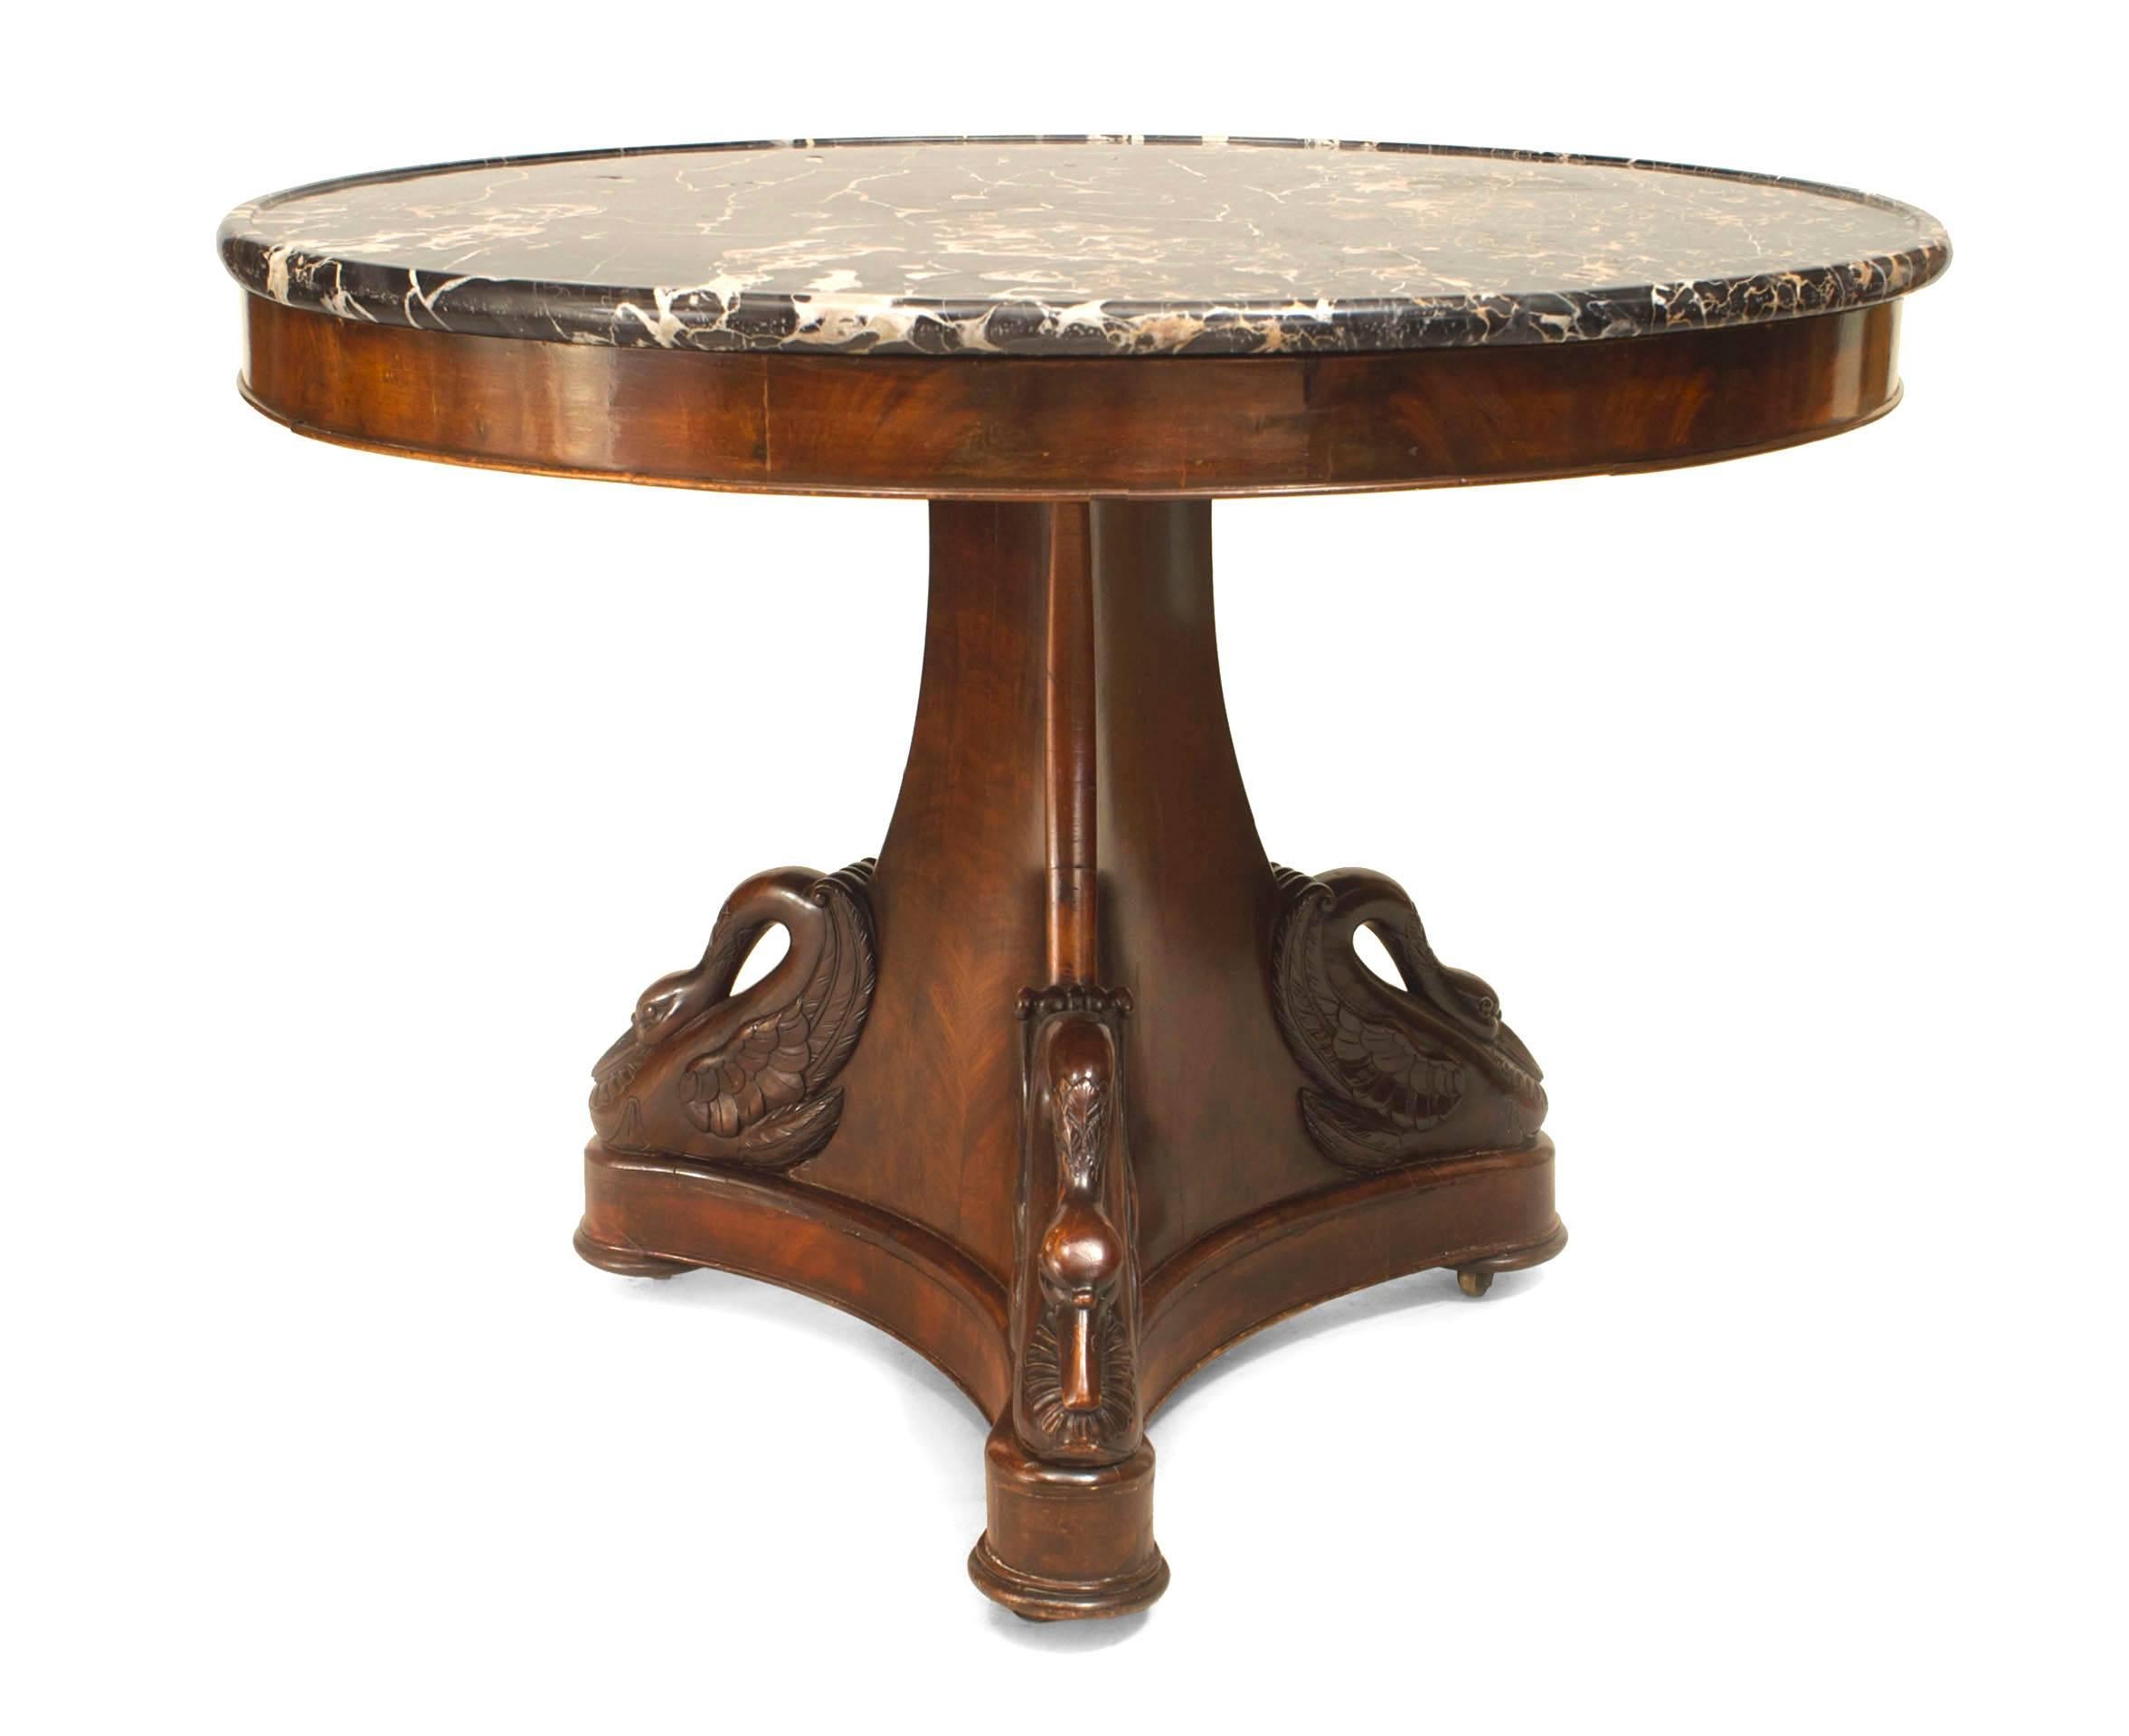 French Empire mahogany pedestal base center table with 3 carved swans on a base supporting a round black veined top with an molded edge.
